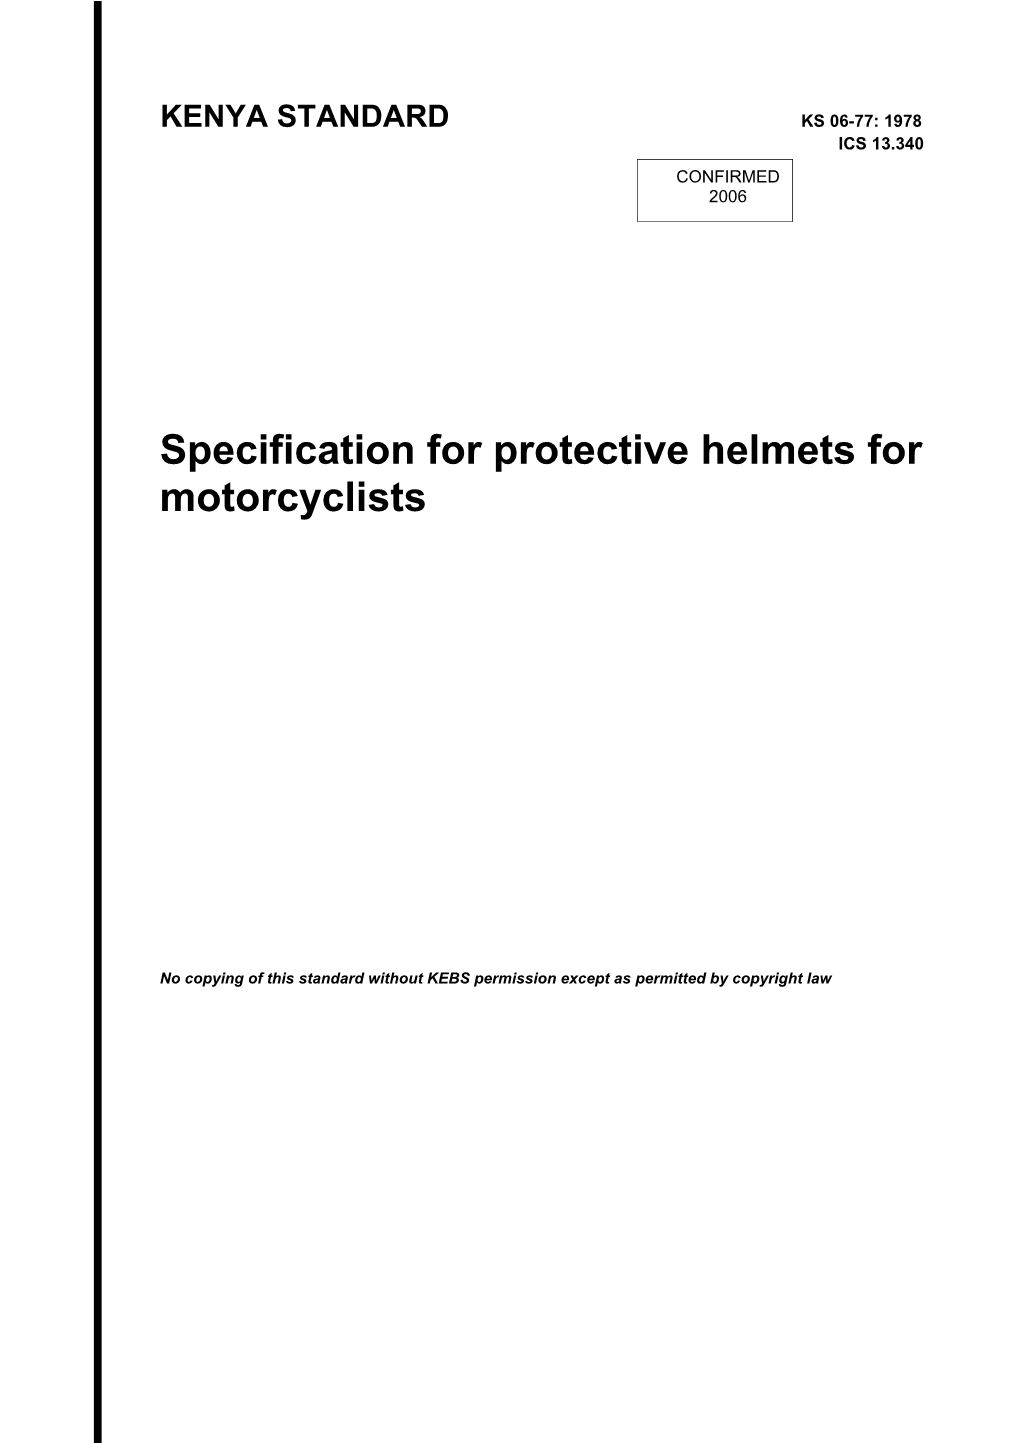 Specification for Protective Helmets for Motorcyclists